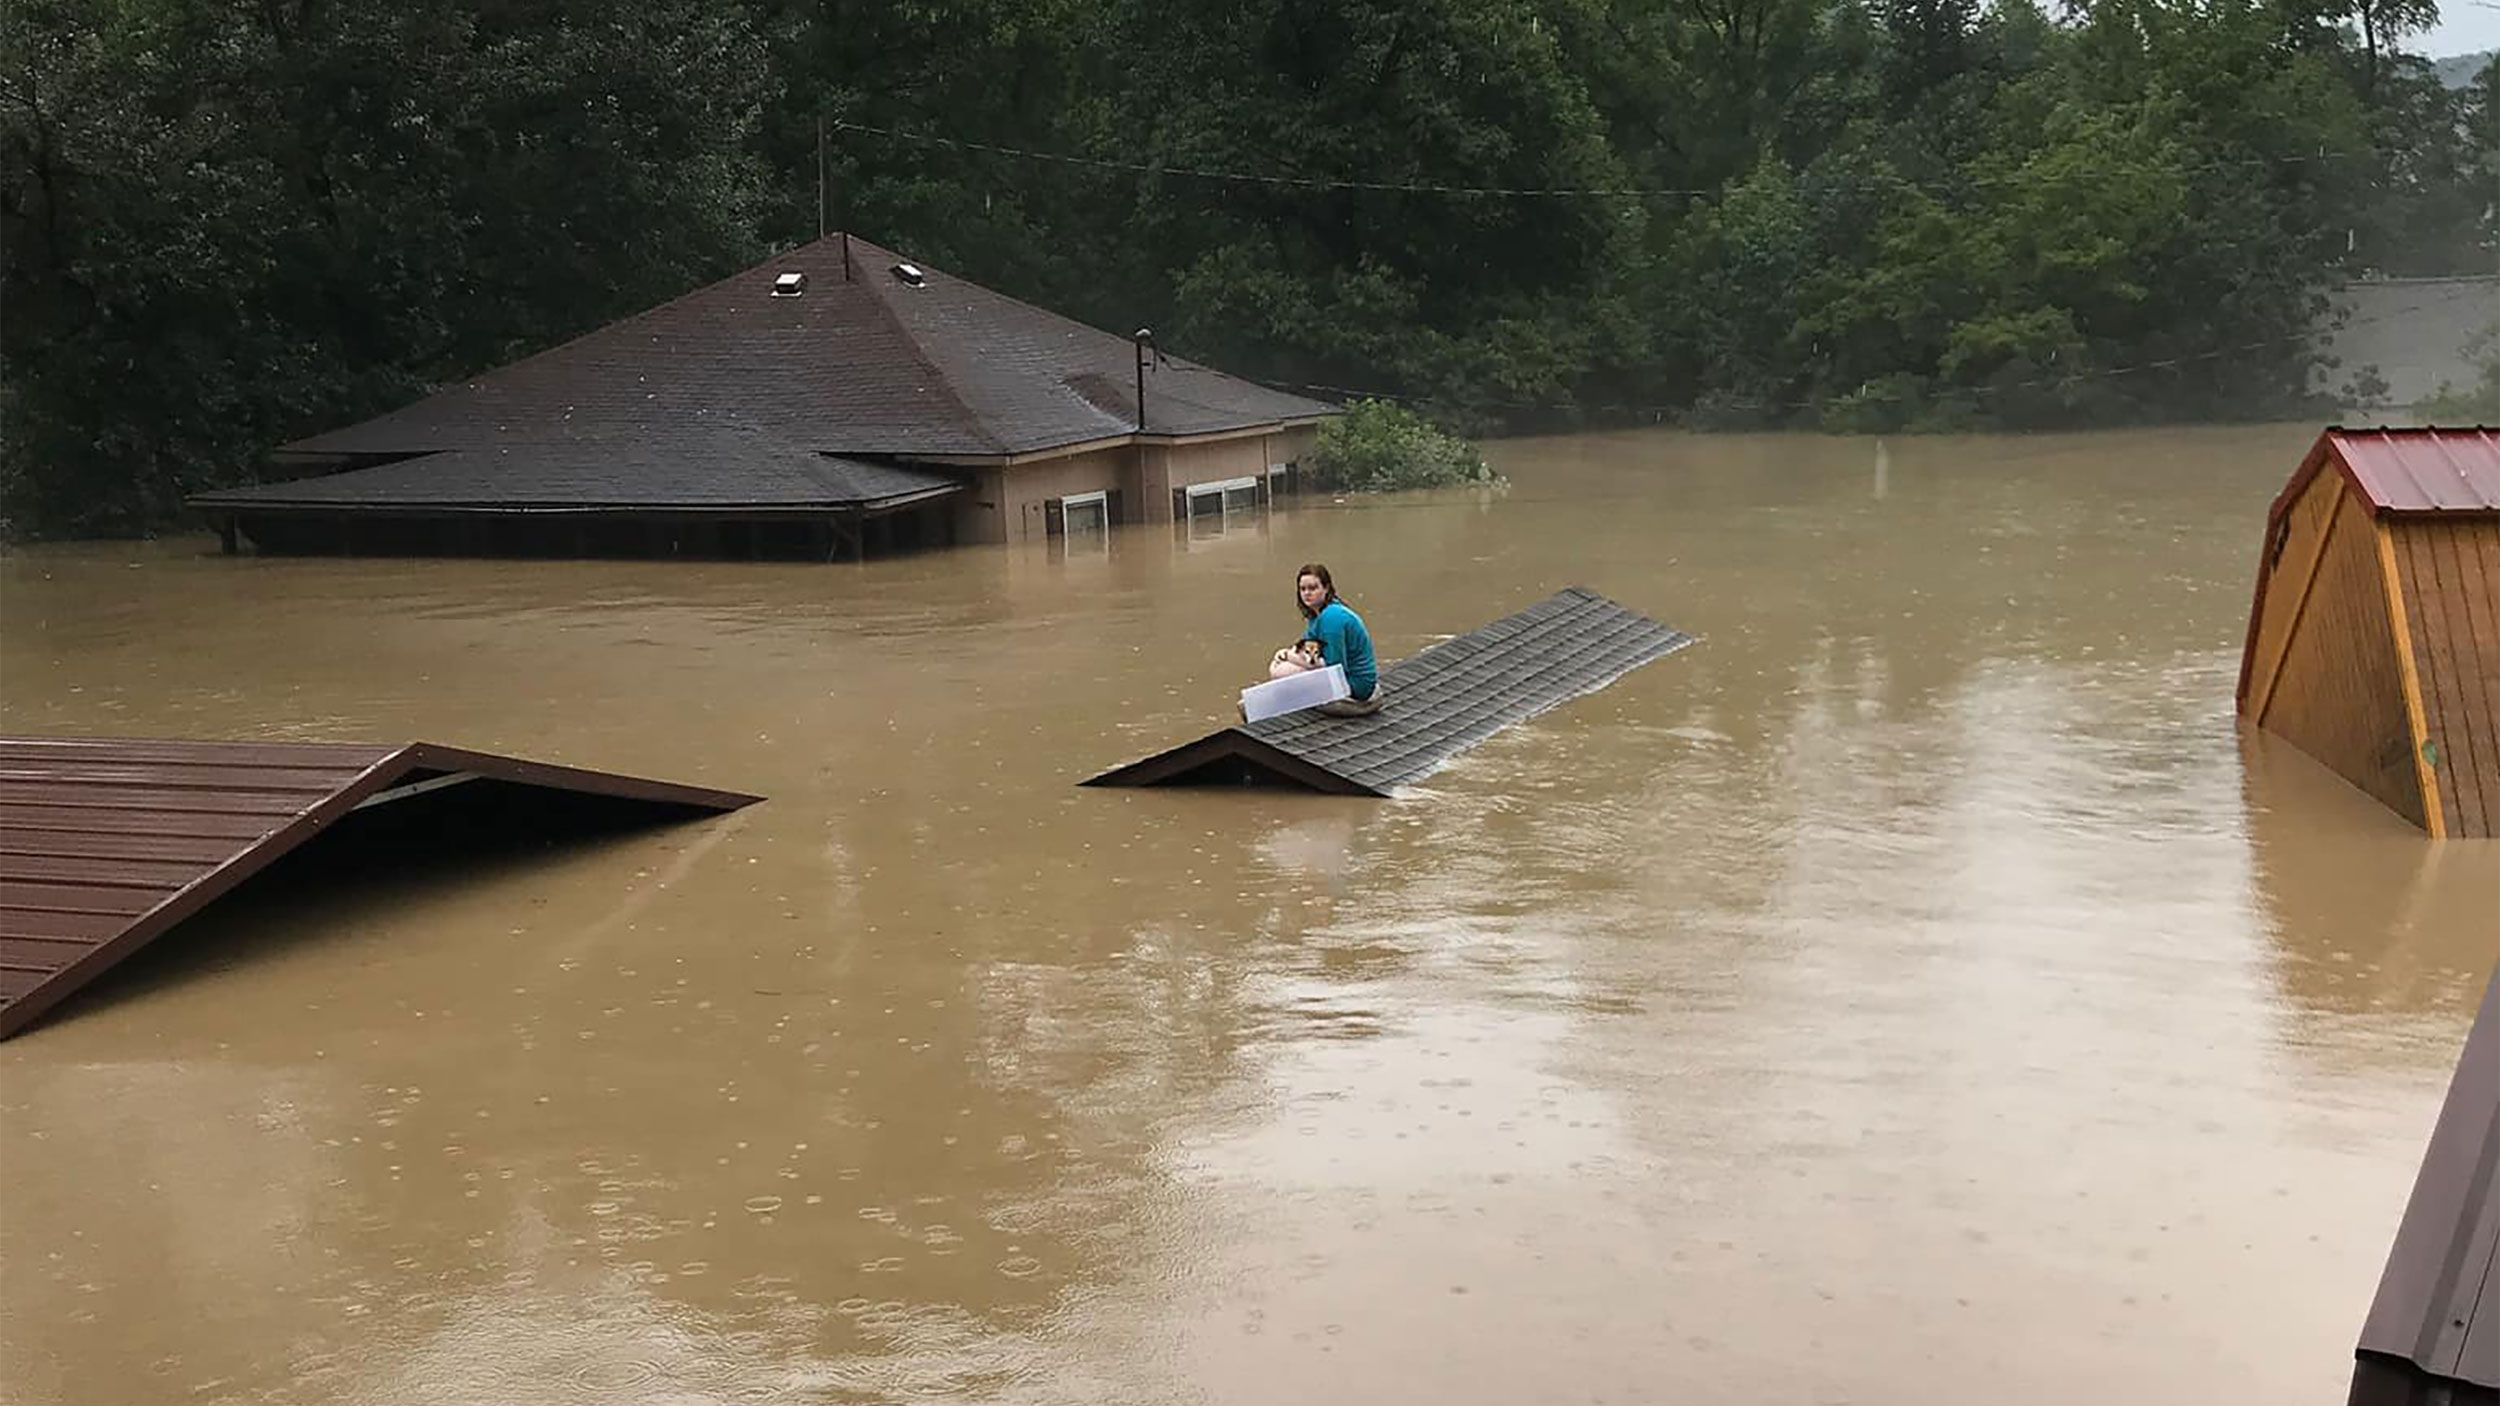 17-Year-Old Swims Out of Flooded Home With Dog and Waits for Hours on Roof to Be Rescued